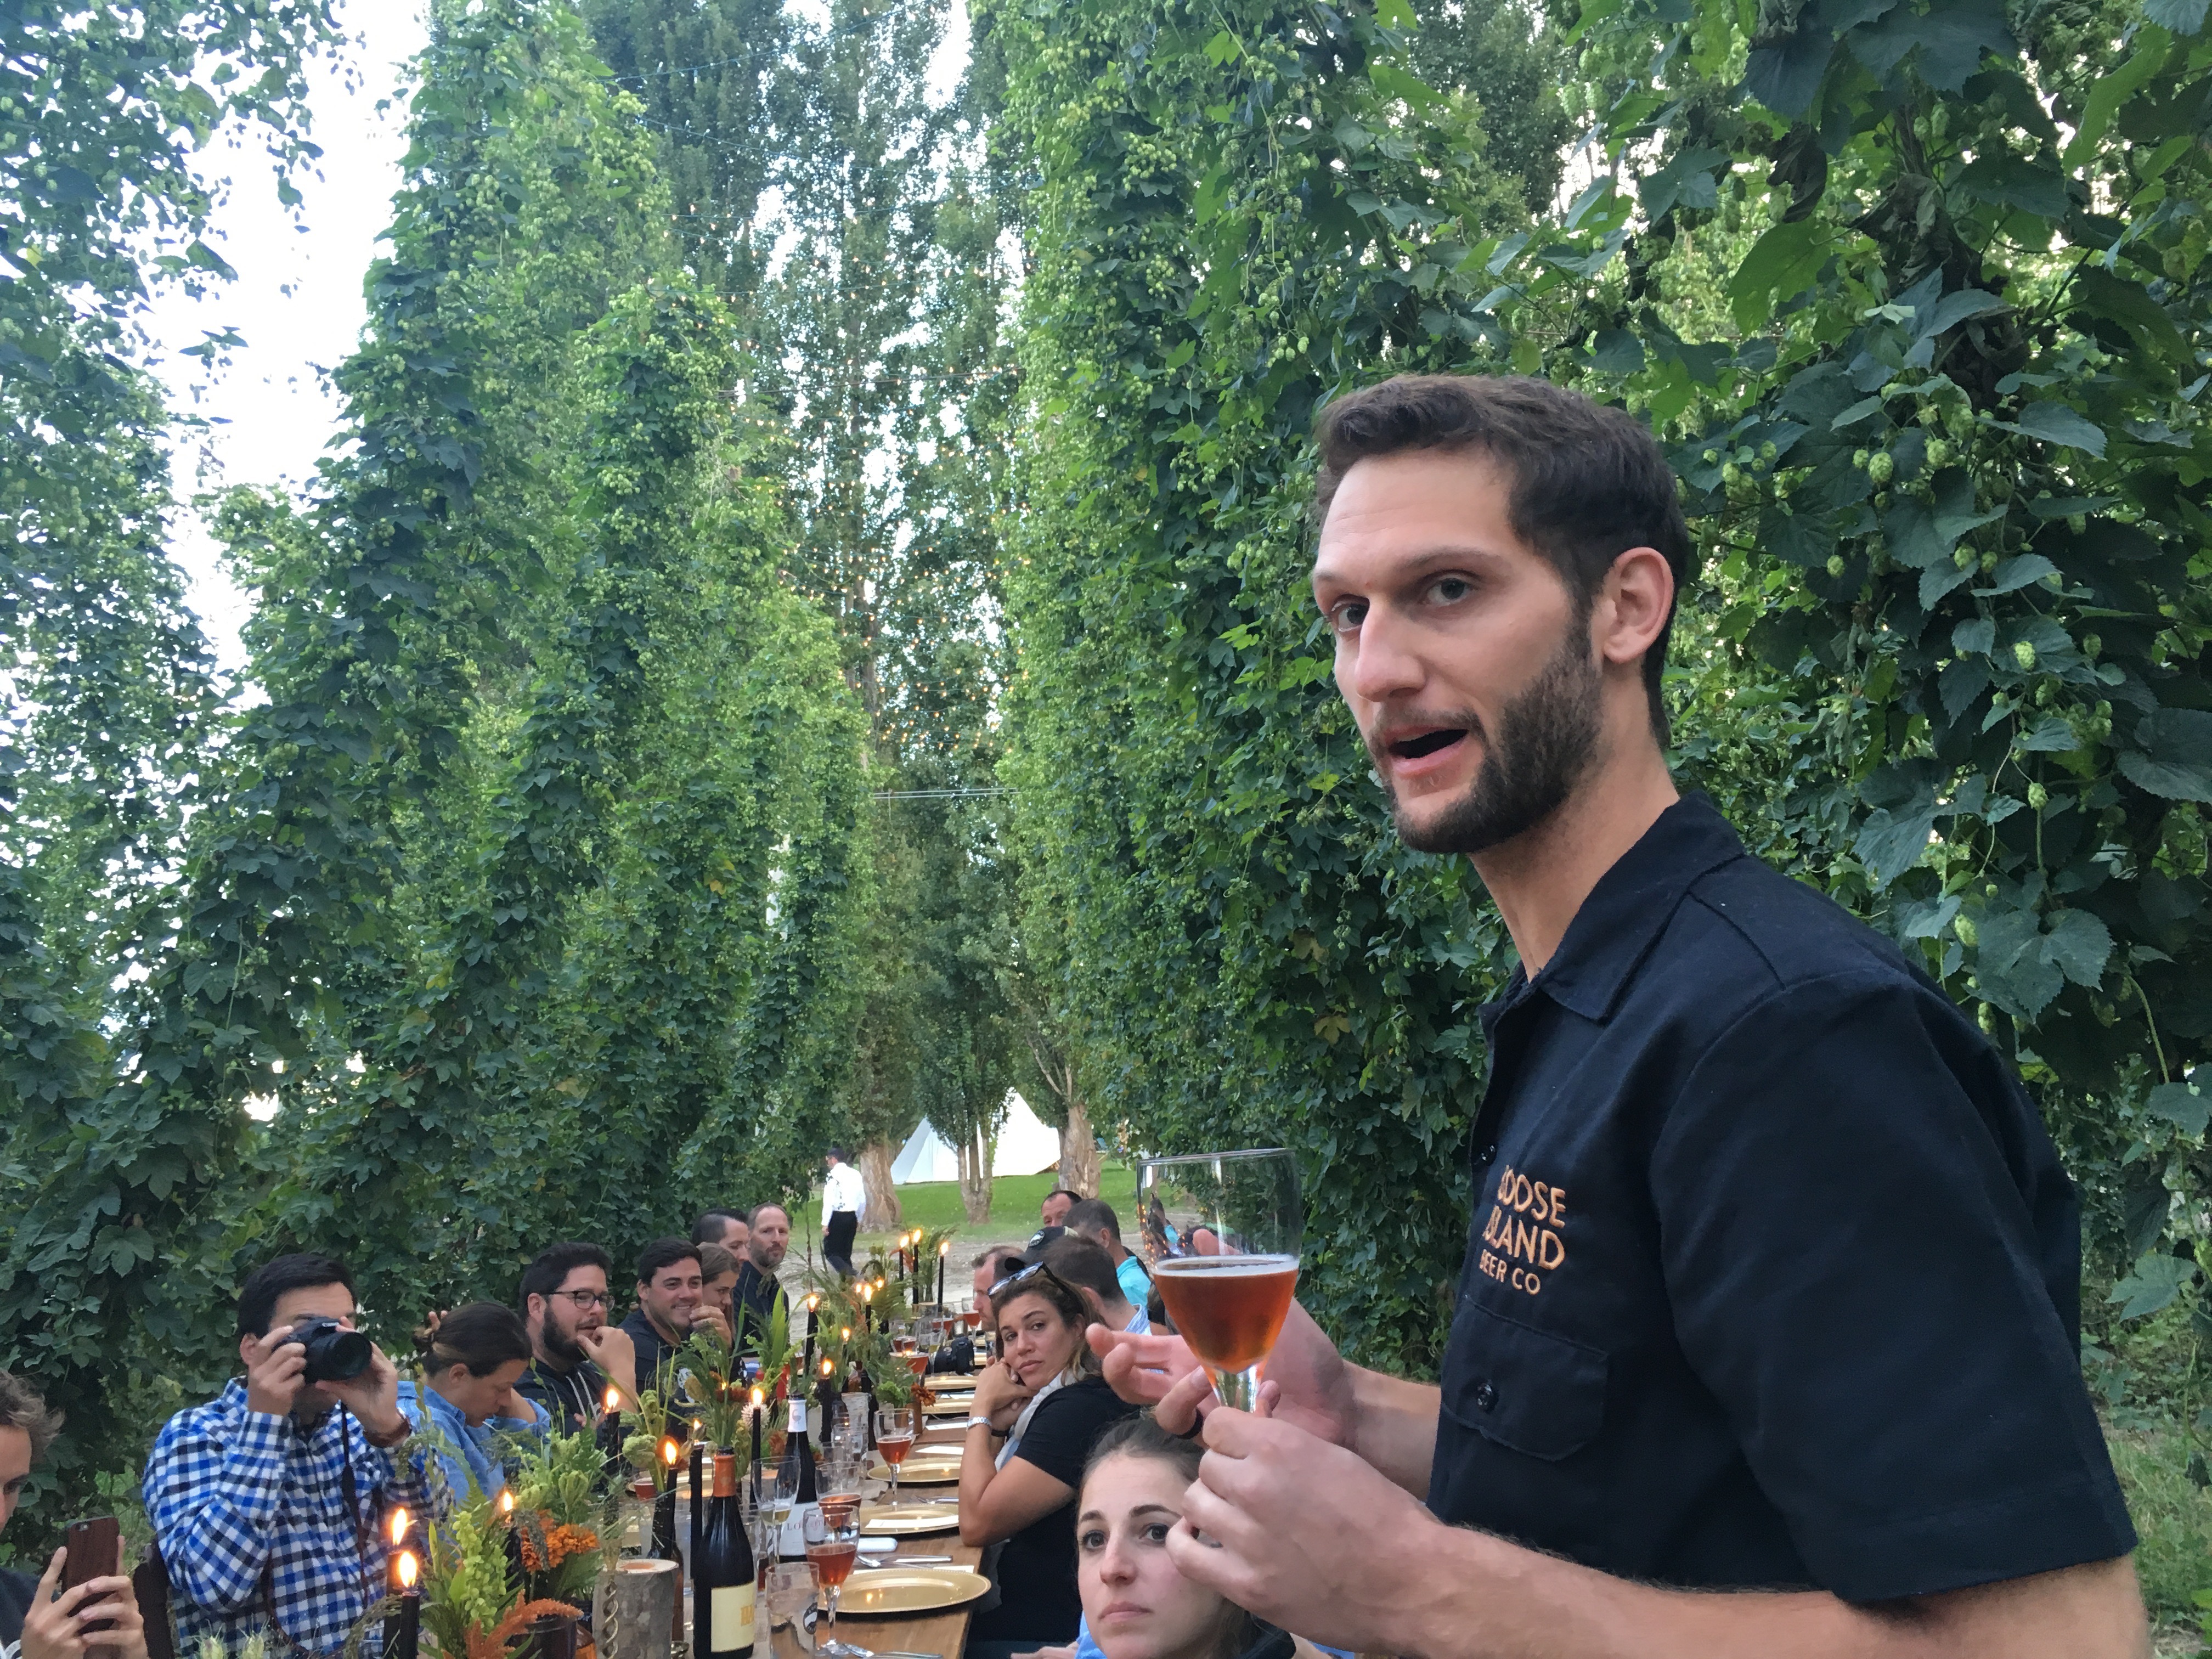 Goose Island brewer Quinn Fuechsl at the dinner in the Elk Mountain Farms hop field.